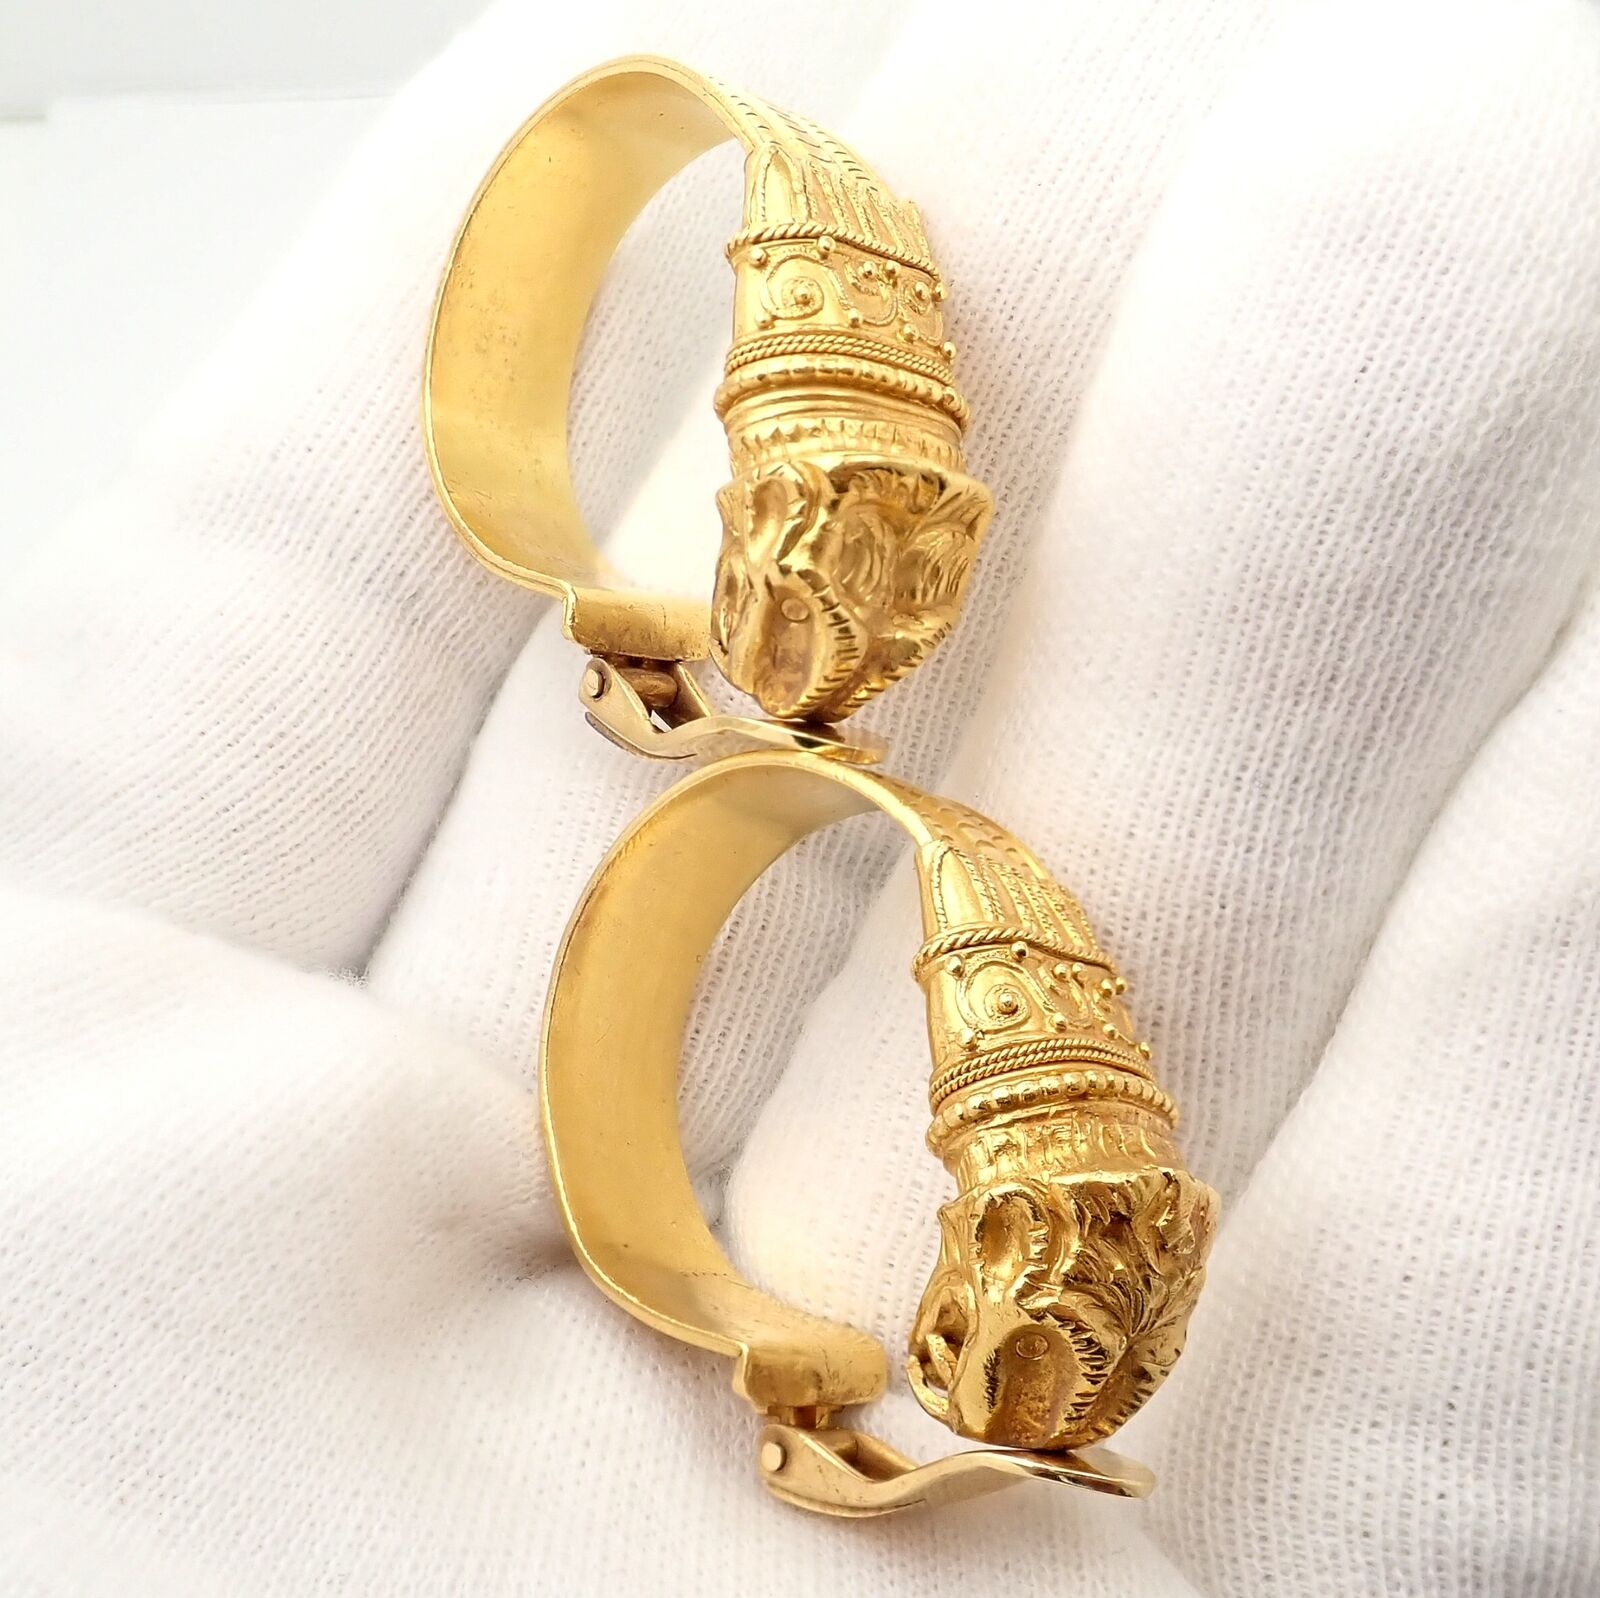 Lalaounis Jewelry & Watches:Vintage & Antique Jewelry:Earrings Vintage Estate Ilias Lalaounis 18k Yellow Gold Cobra Chimera Hoop Earrings